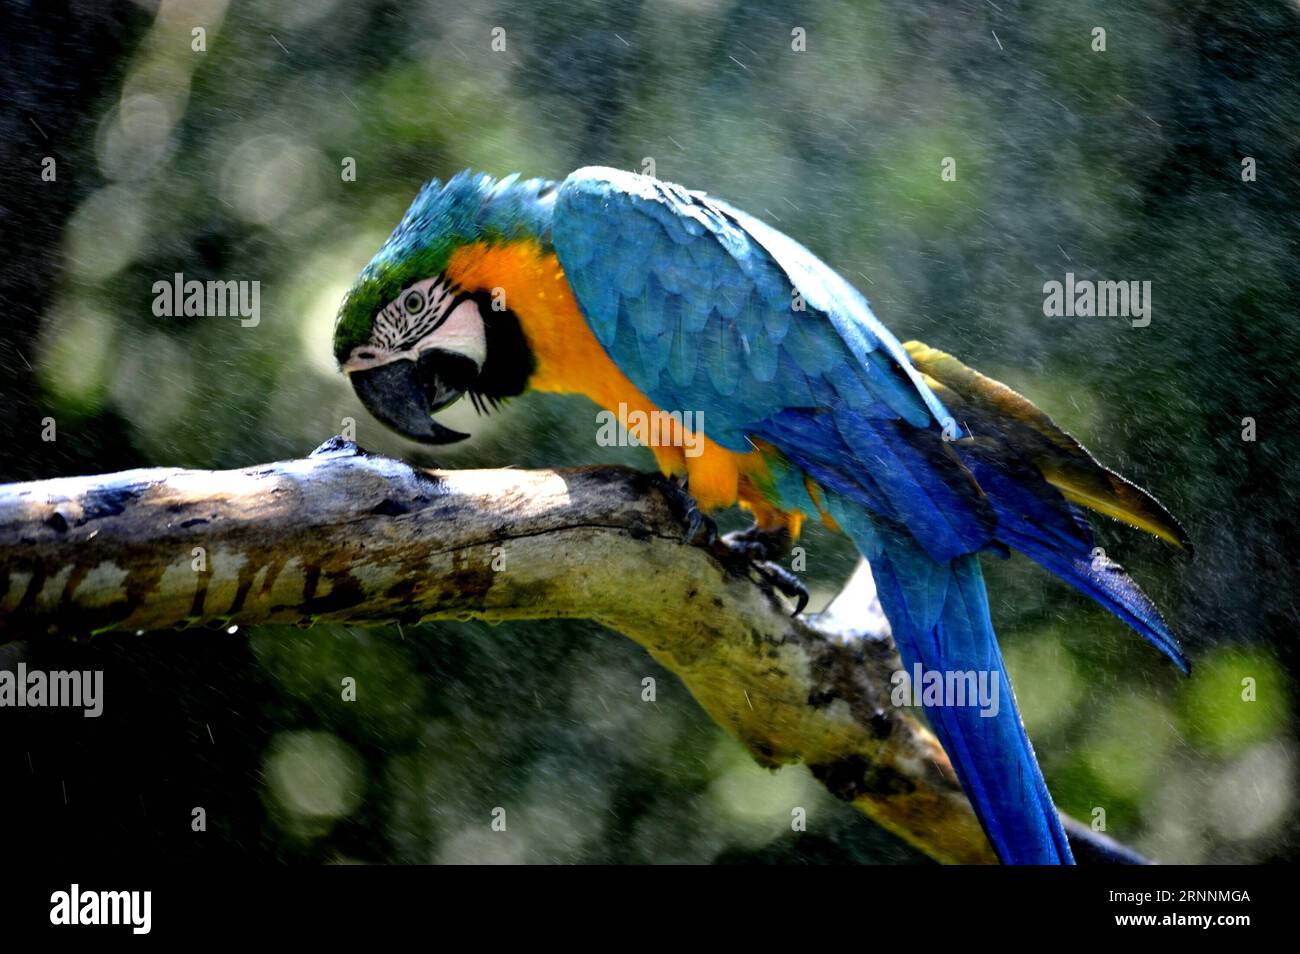 (170721) -- SHANGHAI, July 21, 2017 -- A blue-and-yellow macaw enjoys spray-cooling at Shanghai Zoo in east China s Shanghai, July 21, 2017. The meteorological department of east China metropolis Shanghai recorded an air temperature of 40.9 degrees Celsius (105.6 degrees Fahrenheit) at around 2 p.m. Friday, the highest on record in the city in 145 years. The Shanghai Zoo has took many measures to keep the animals cool. ) (lb) CHINA-SHANGHAI-ANIMAL-SUMMER HEAT (CN) ZhangxJiansong PUBLICATIONxNOTxINxCHN   Shanghai July 21 2017 a Blue and Yellow Macaw enjoys Spray Cooling AT Shanghai Zoo in East Stock Photo